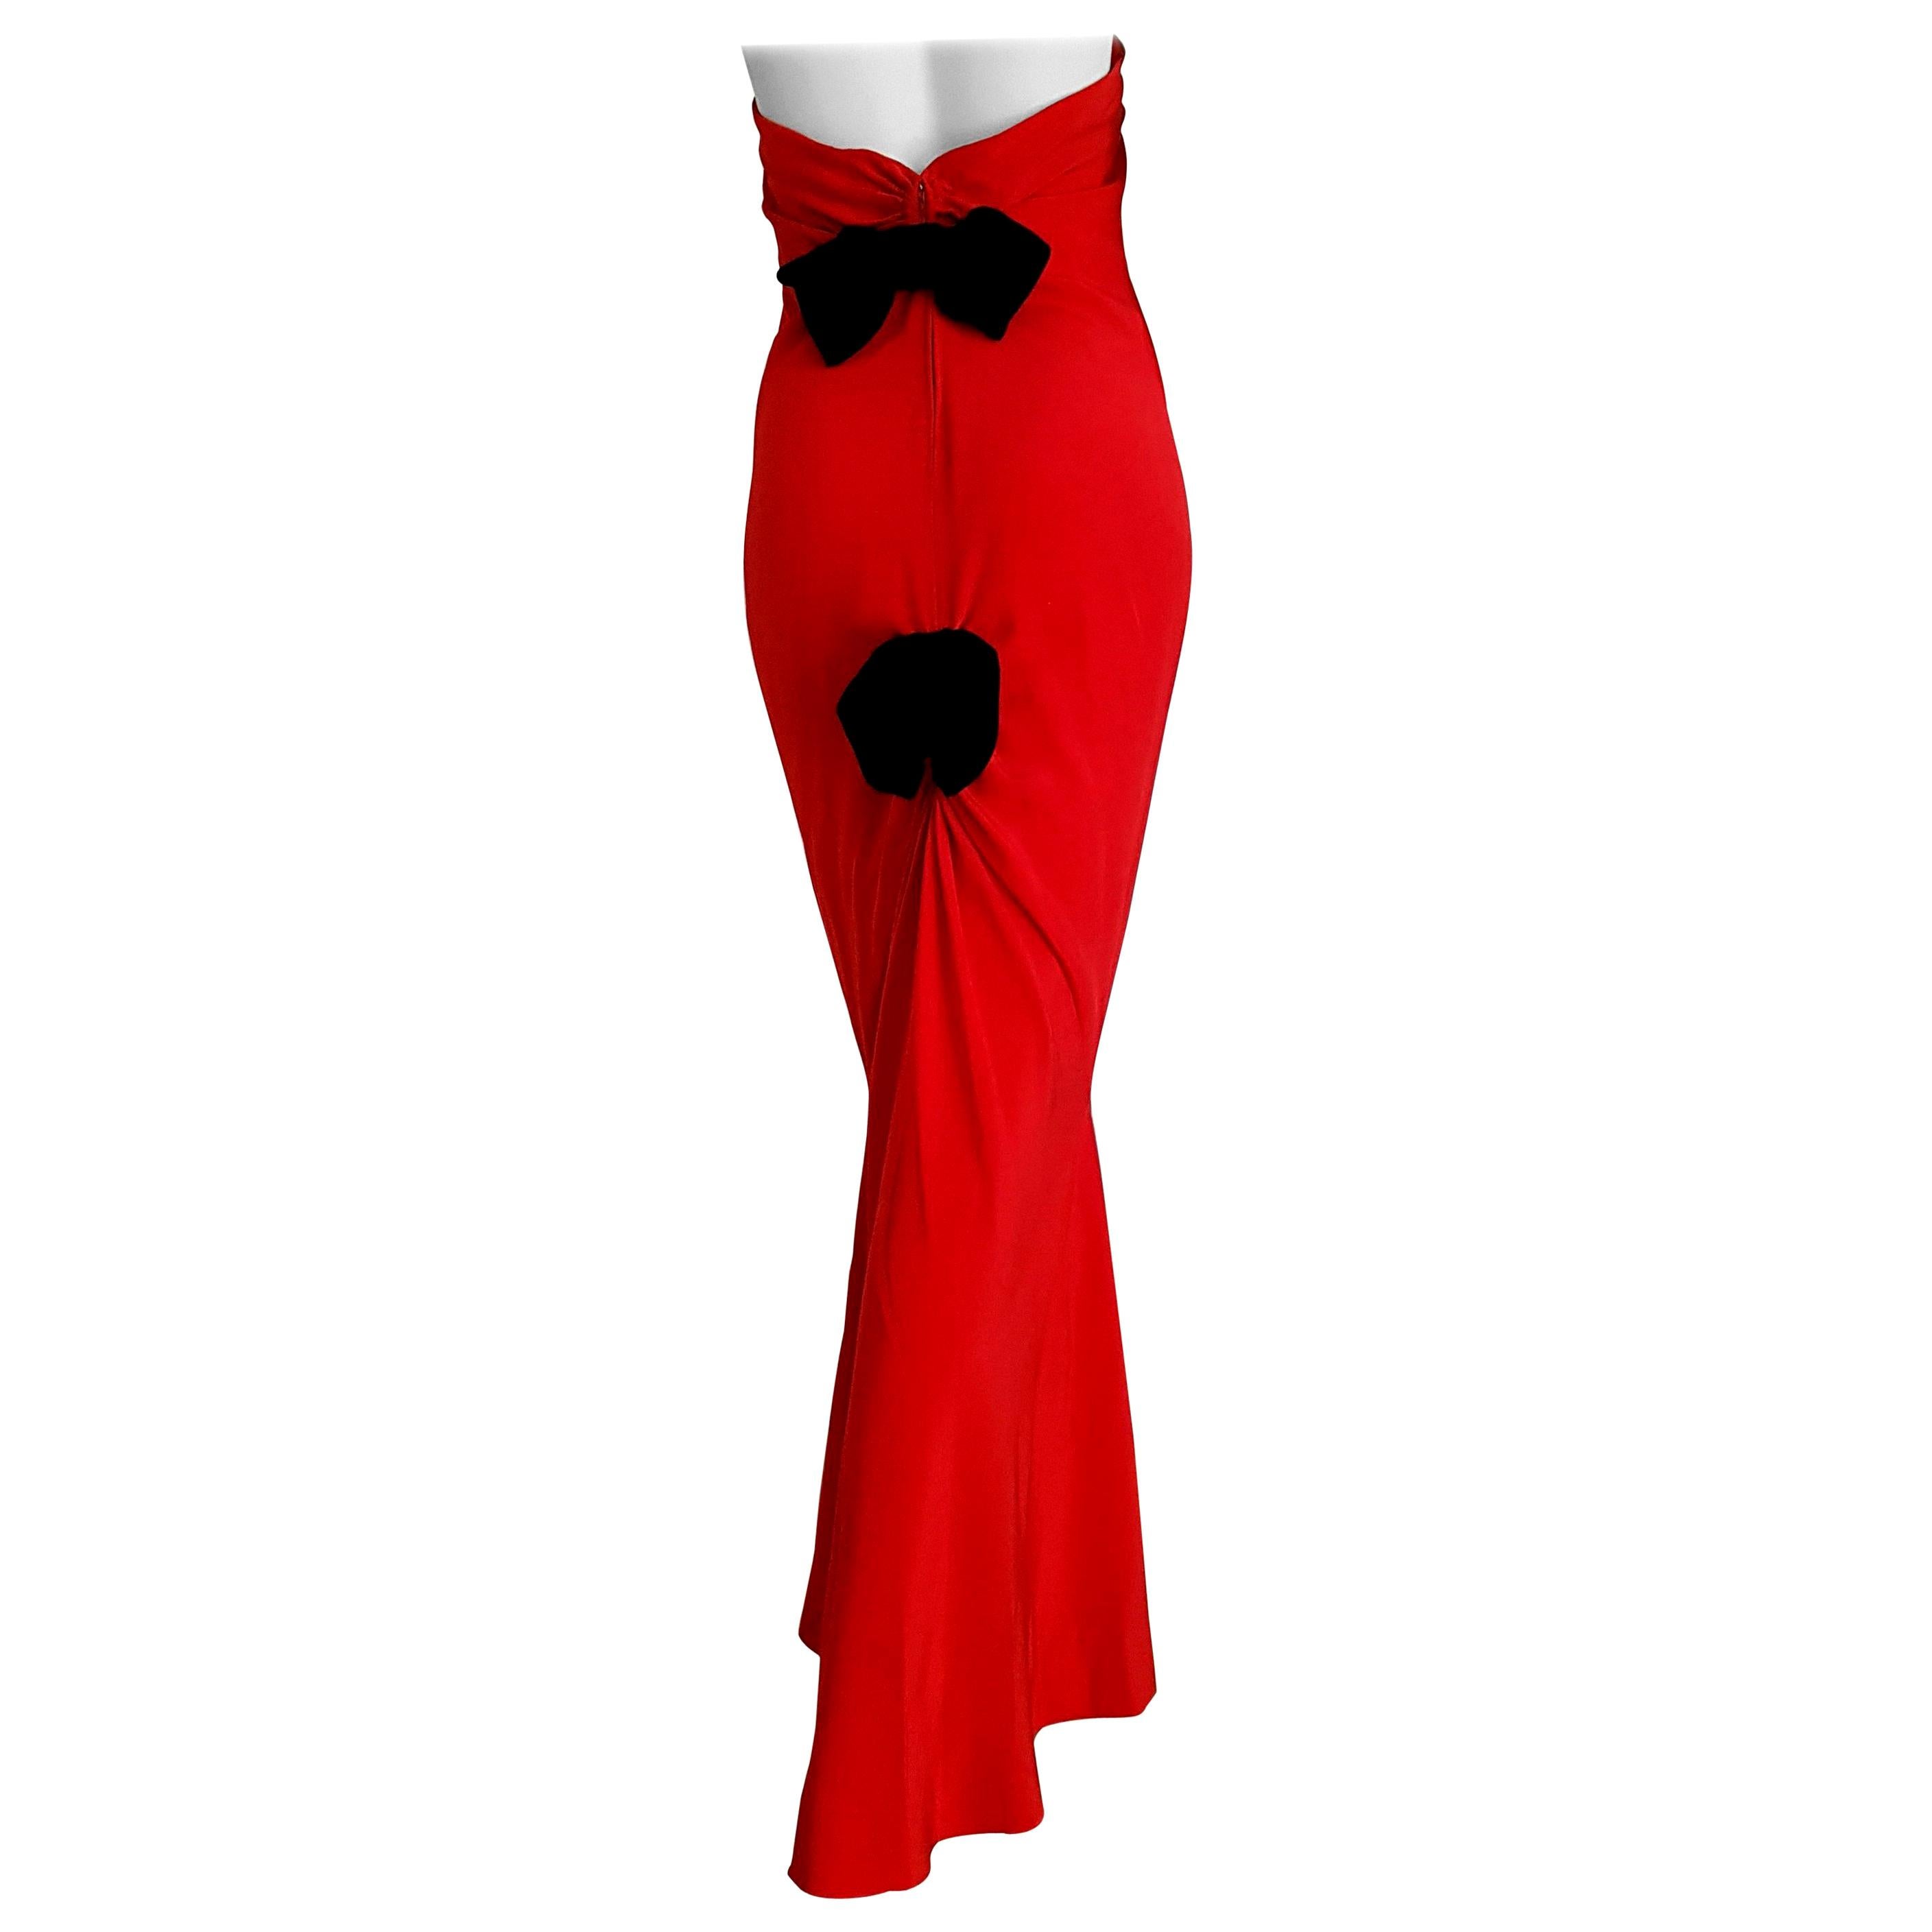 VALENTINO Haute Couture red silk dress with two bows on the back - Unworn, New

SIZE: equivalent to about Small / Medium, please review approx measurements as follows in cm: lenght 122, chest underarm to underarm 48, bust circumference 86, waist